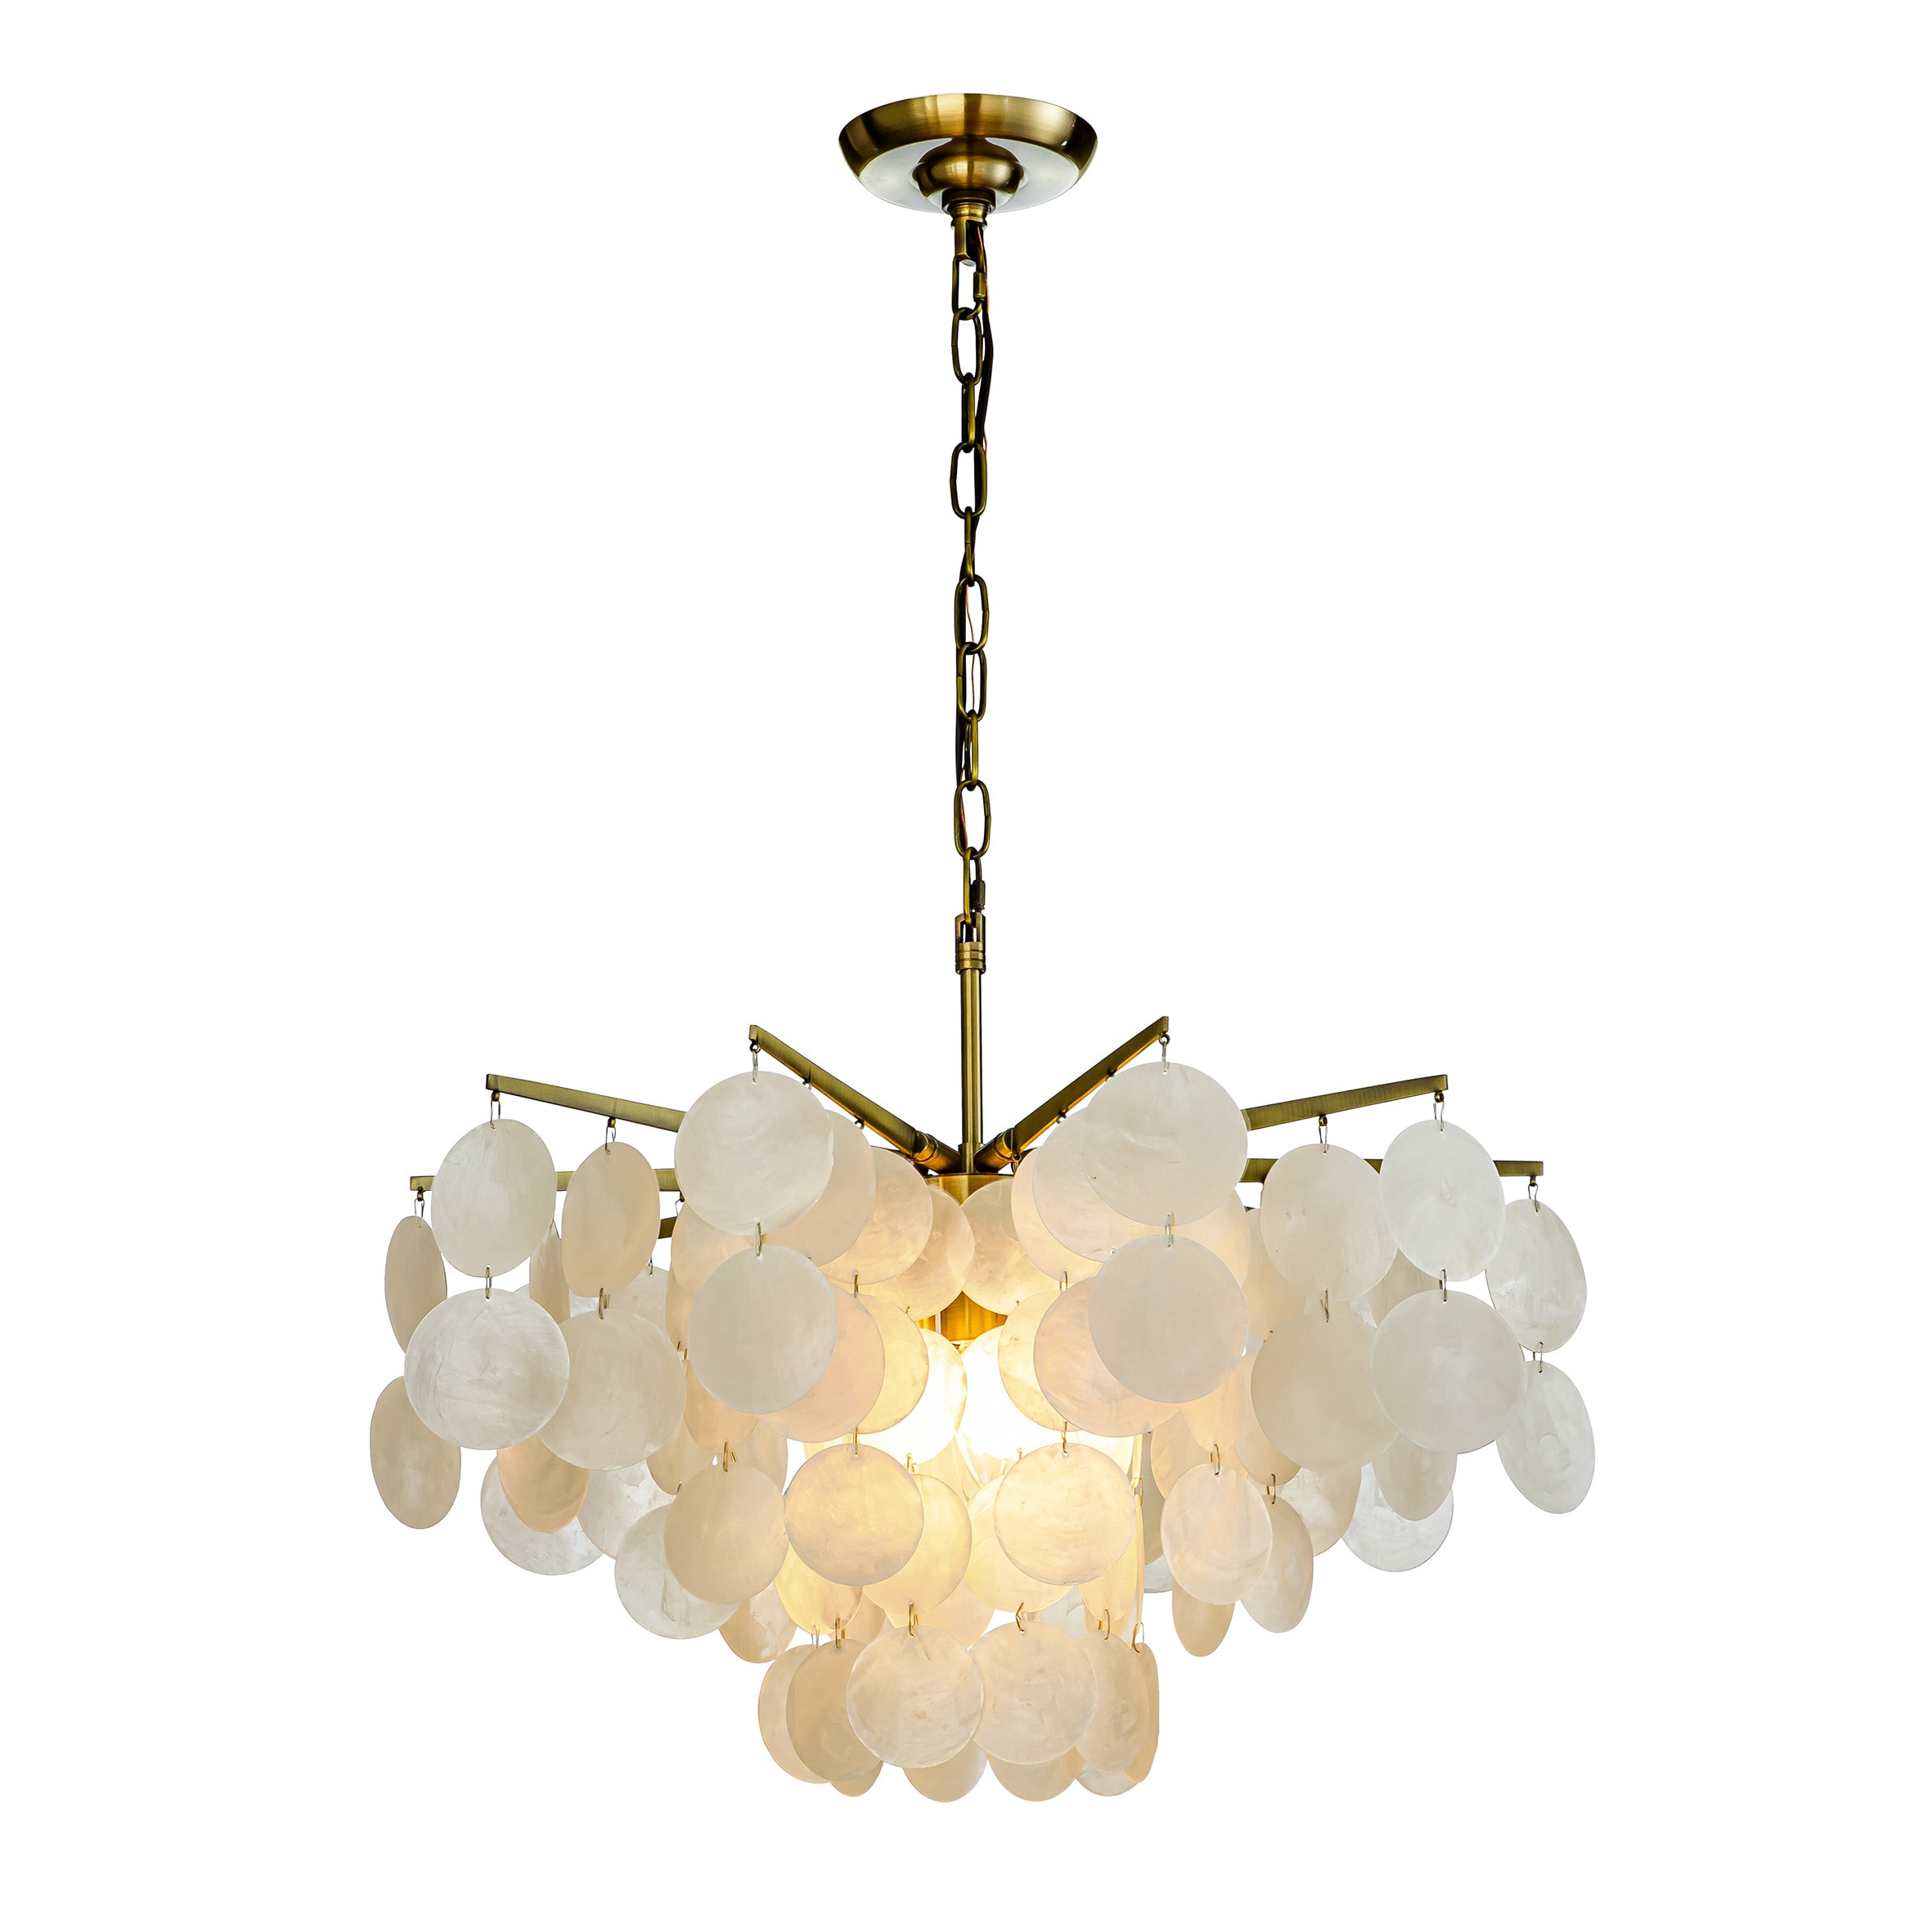 AloaDecor Lighting 4-Light Rated Gold Chandelier Coastal Chandeliers in the Damp department at